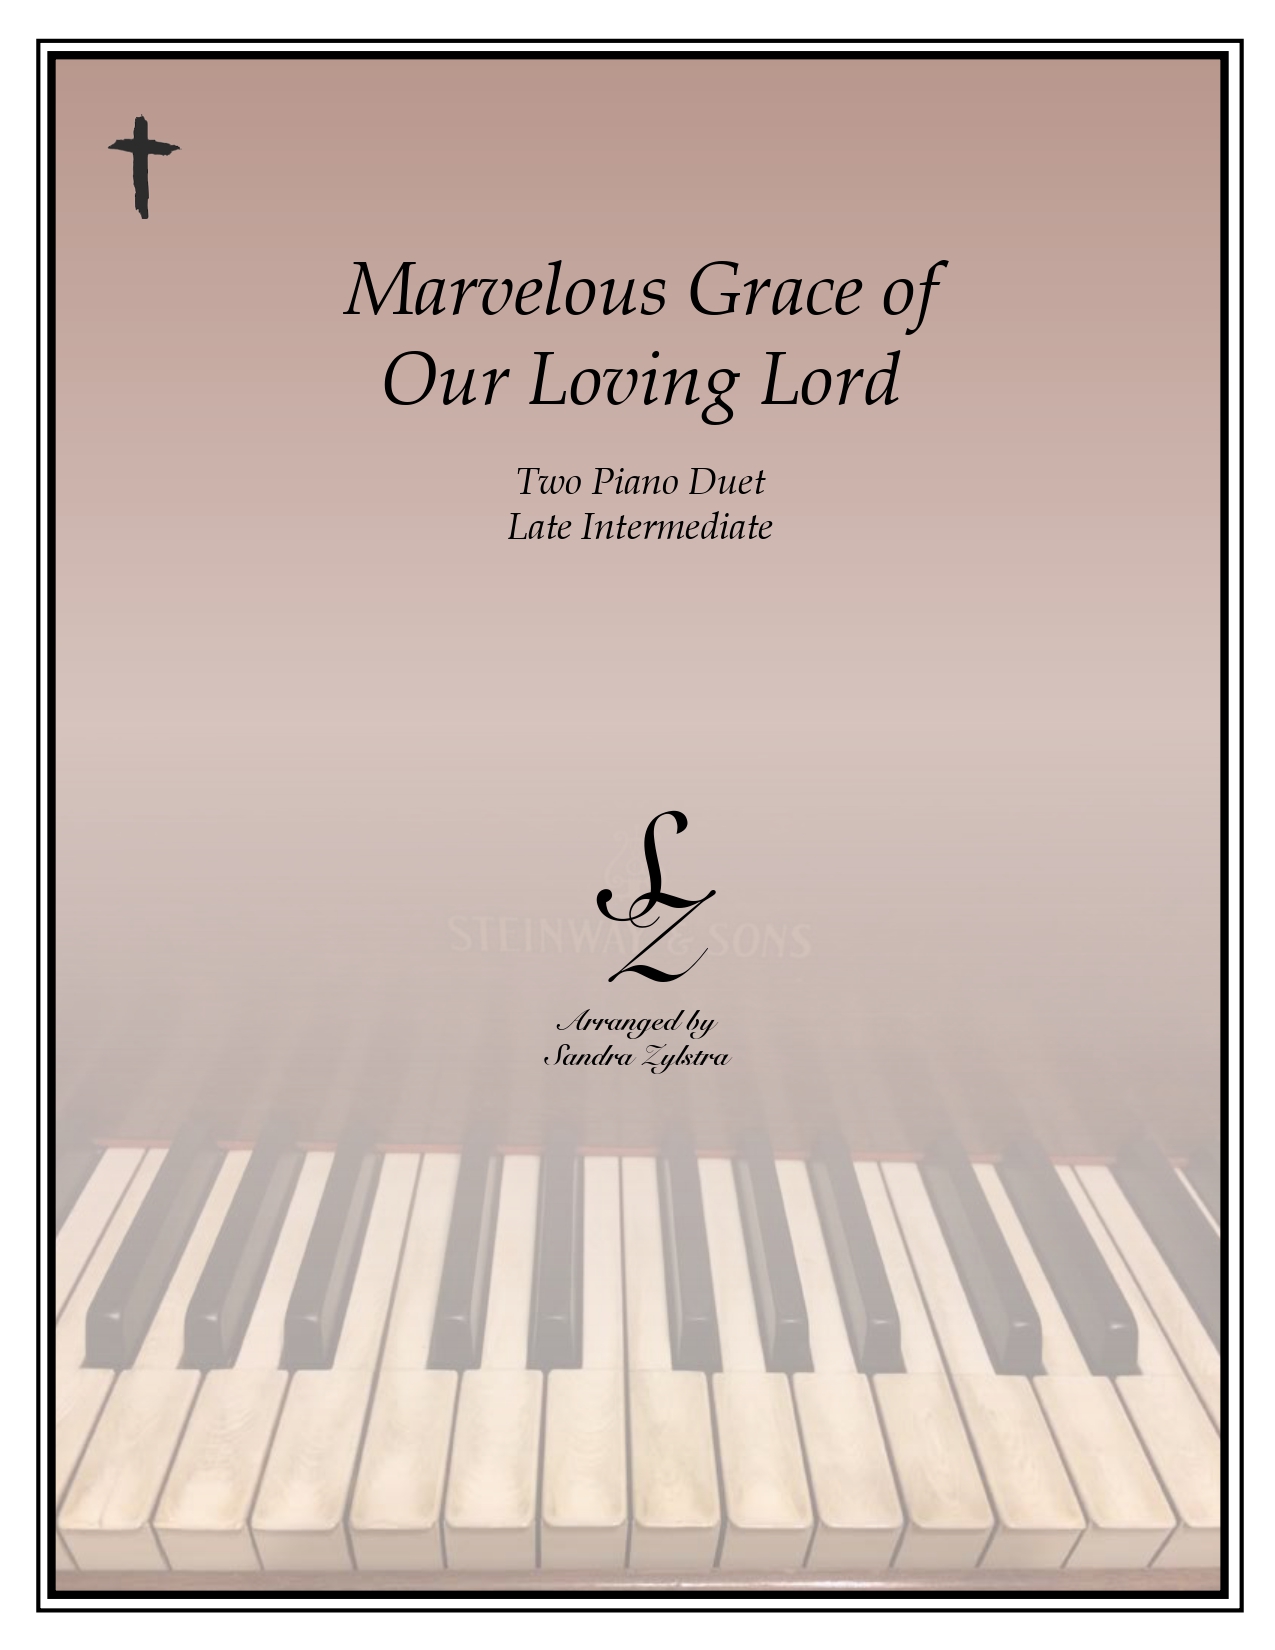 Marvelous Grace Of Our Loving Lord Duet cover page 00011